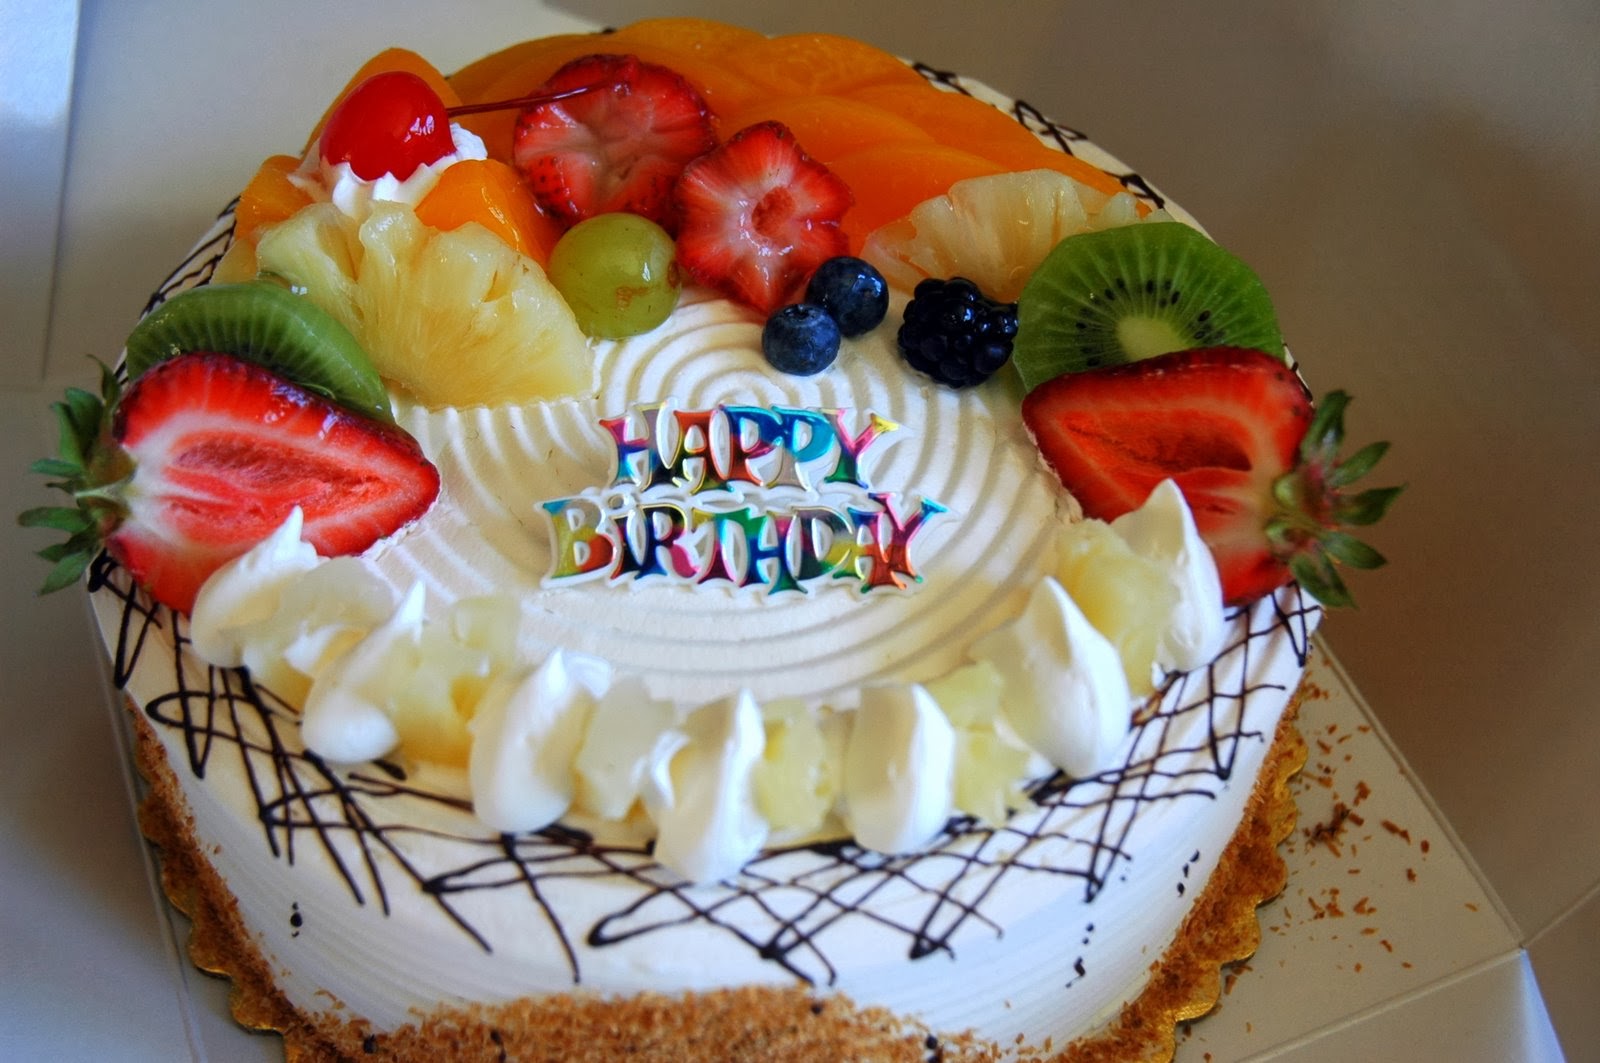 Destop HD Wallpaper Download Free: Many Many returns of the day happy ... - Happy+birthDay+fresh+cake+hD+wallpapers